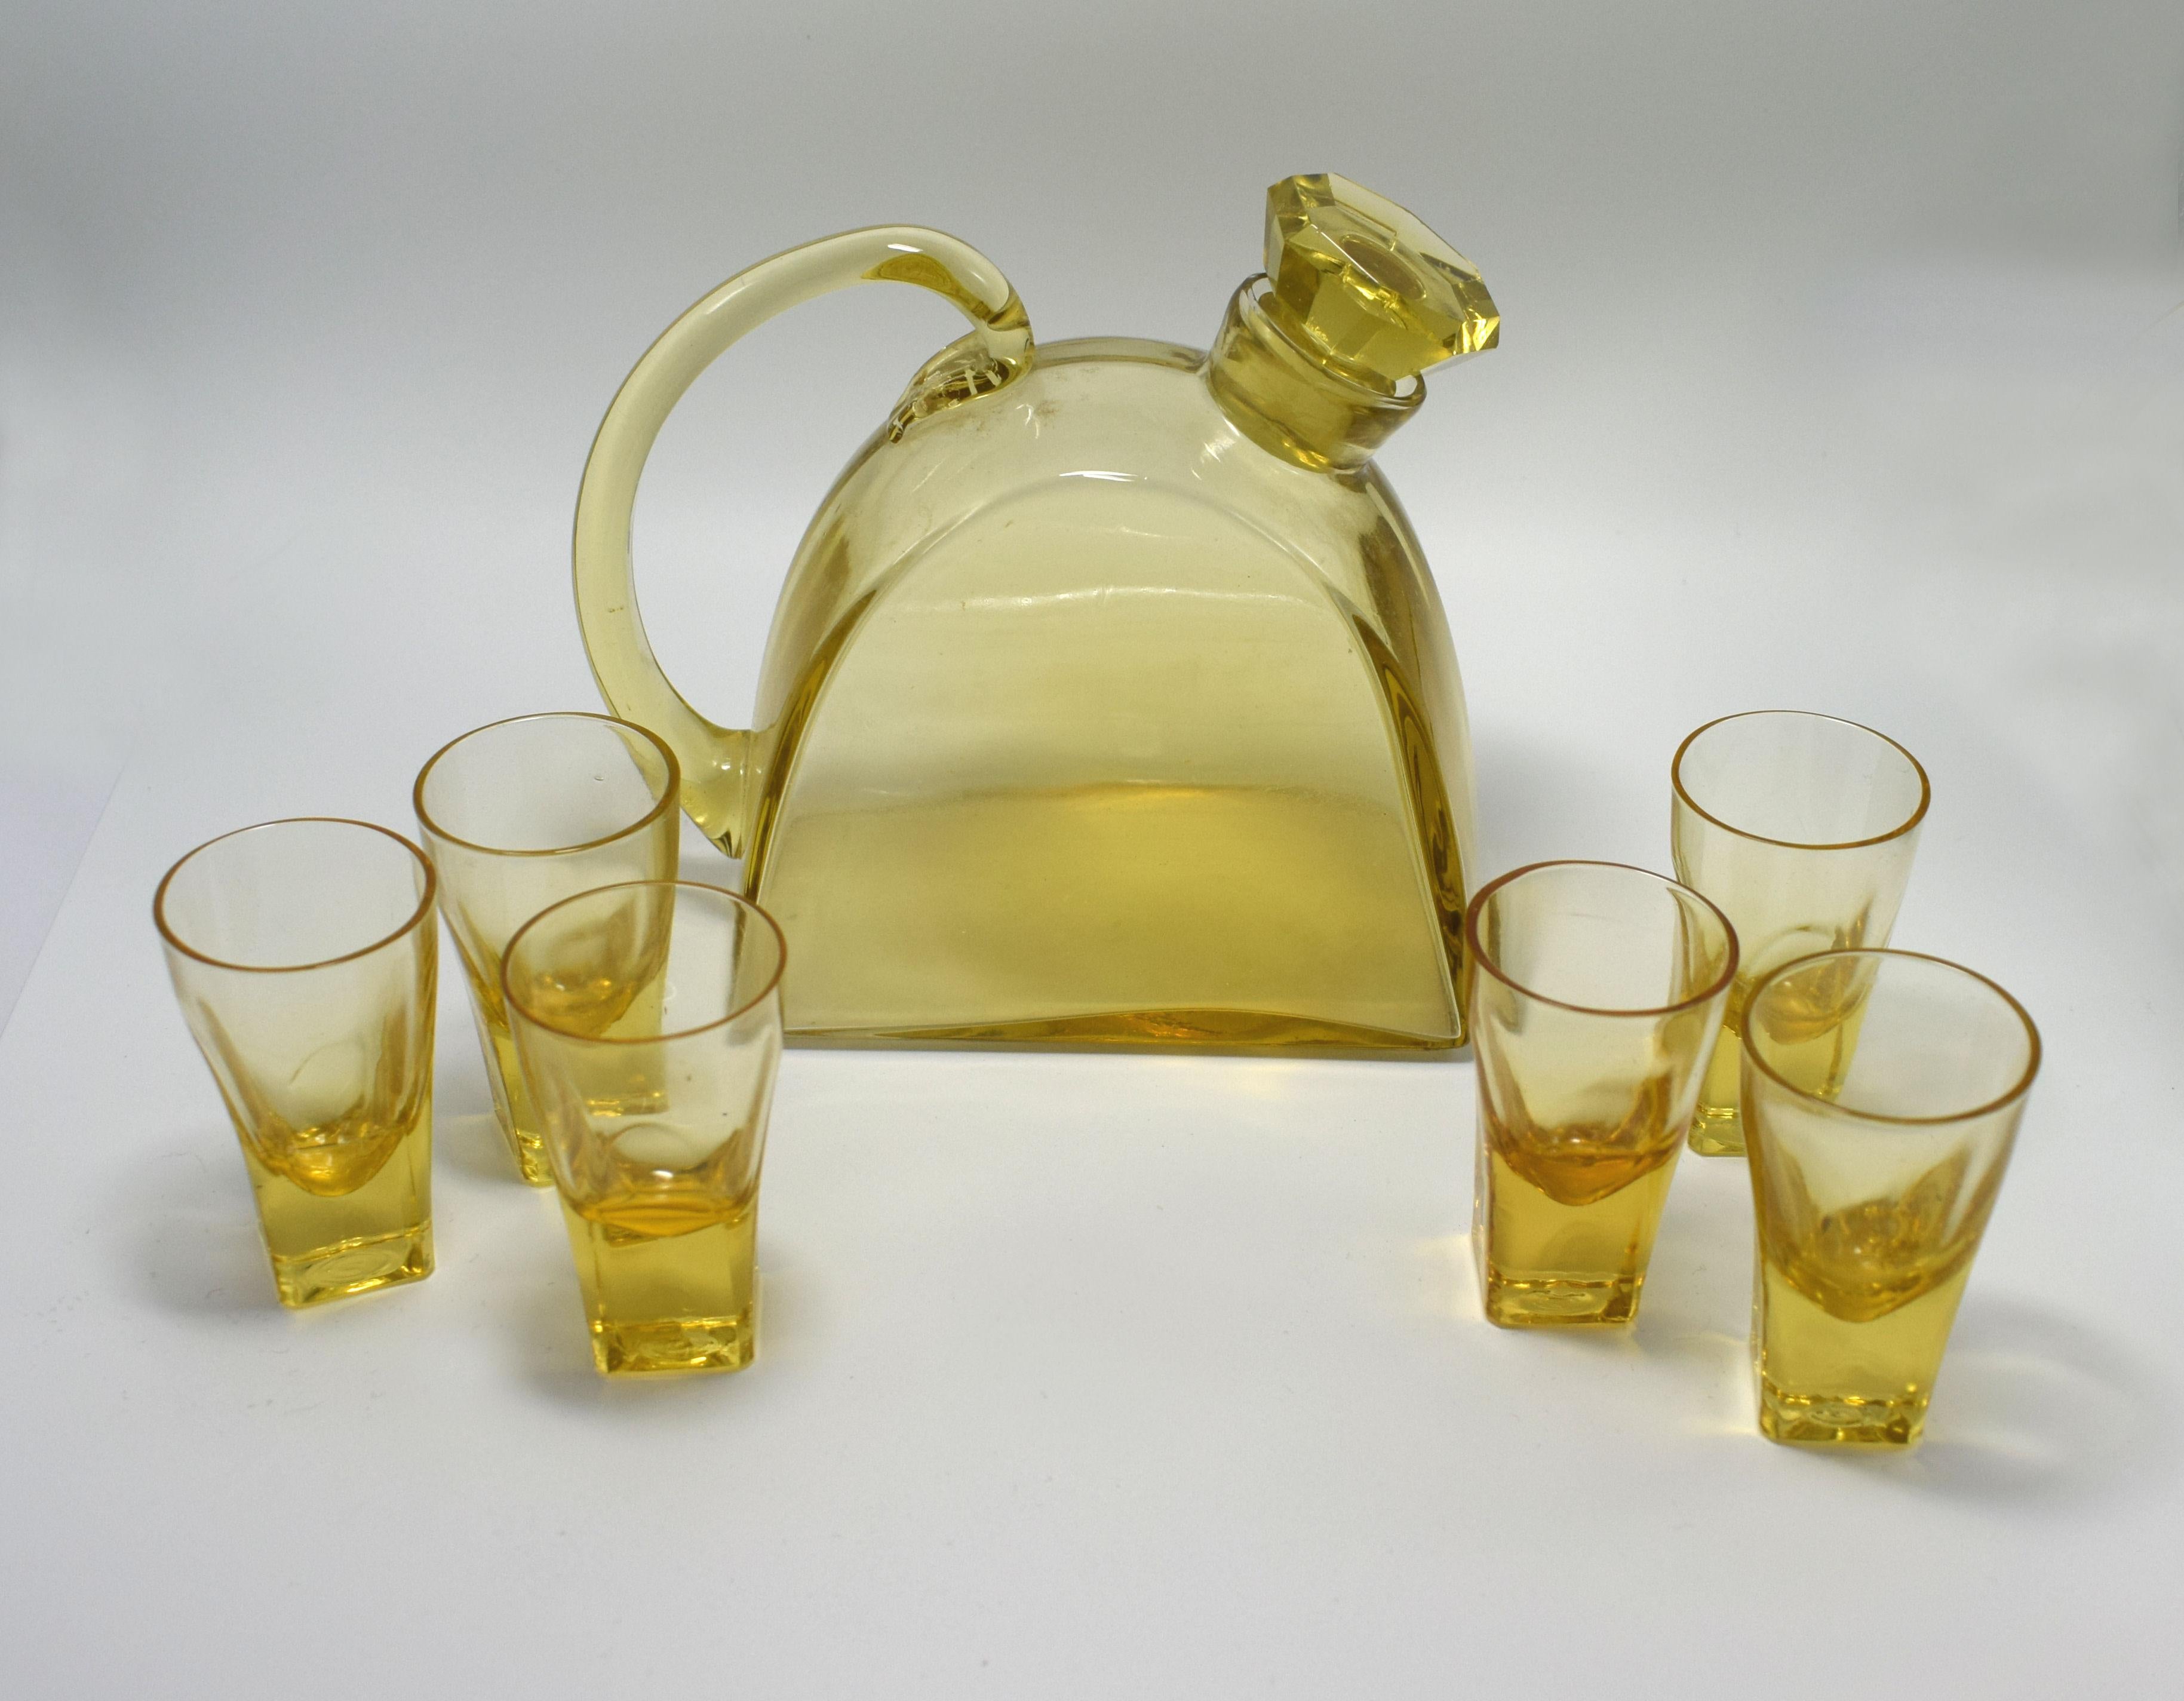 1930s Art Deco decanter set with tray. The tray this is a fabulous and original 1930s Art Deco drinks tray originating from France. Full gold tone metal stepped surround with wooden handles either side. Ideal size for use or display. These trays